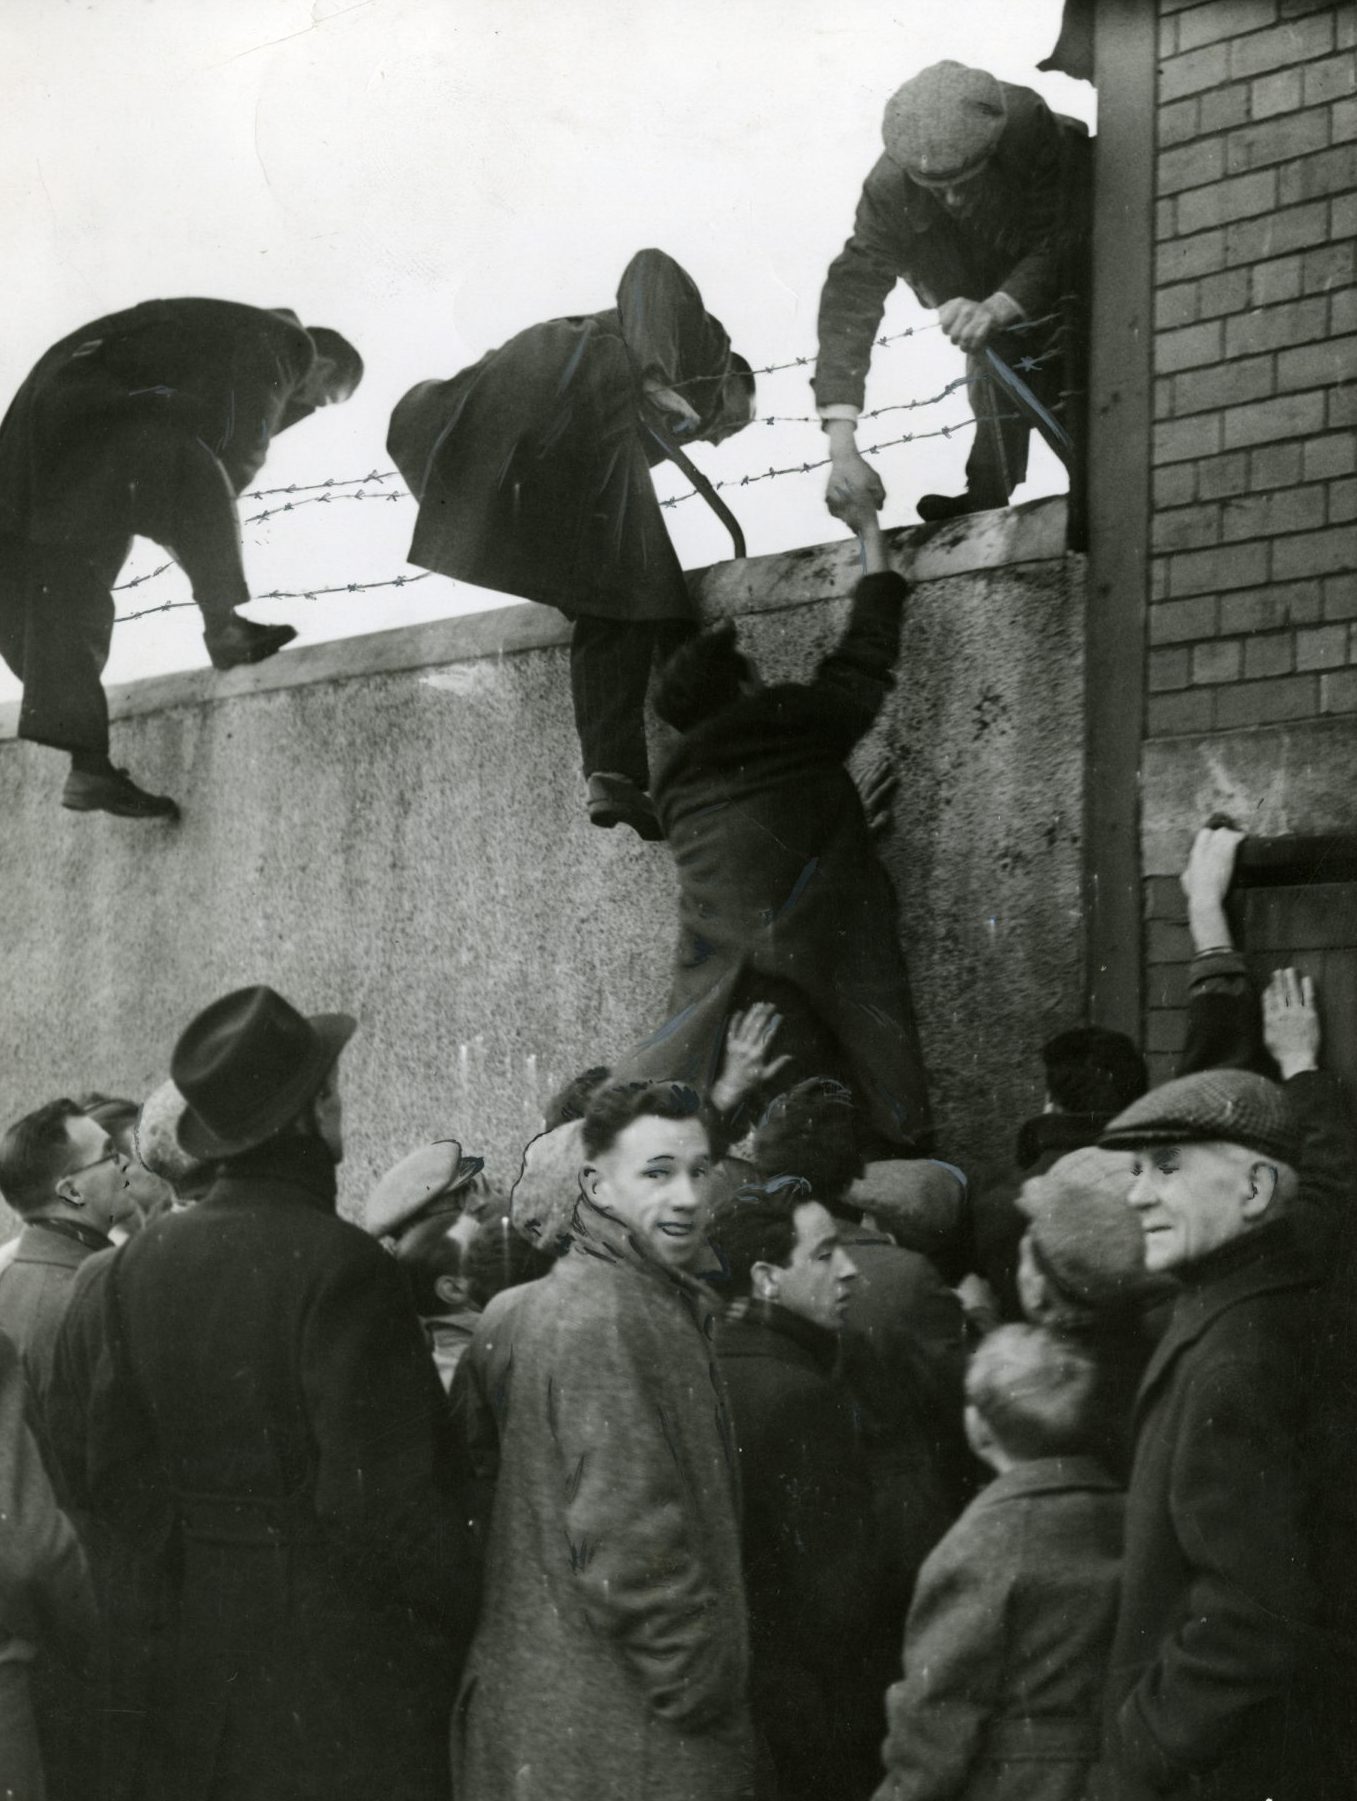 Fans scaling the walls at Dens Park so they can watch the game in 1949. Image: DC Thomson.